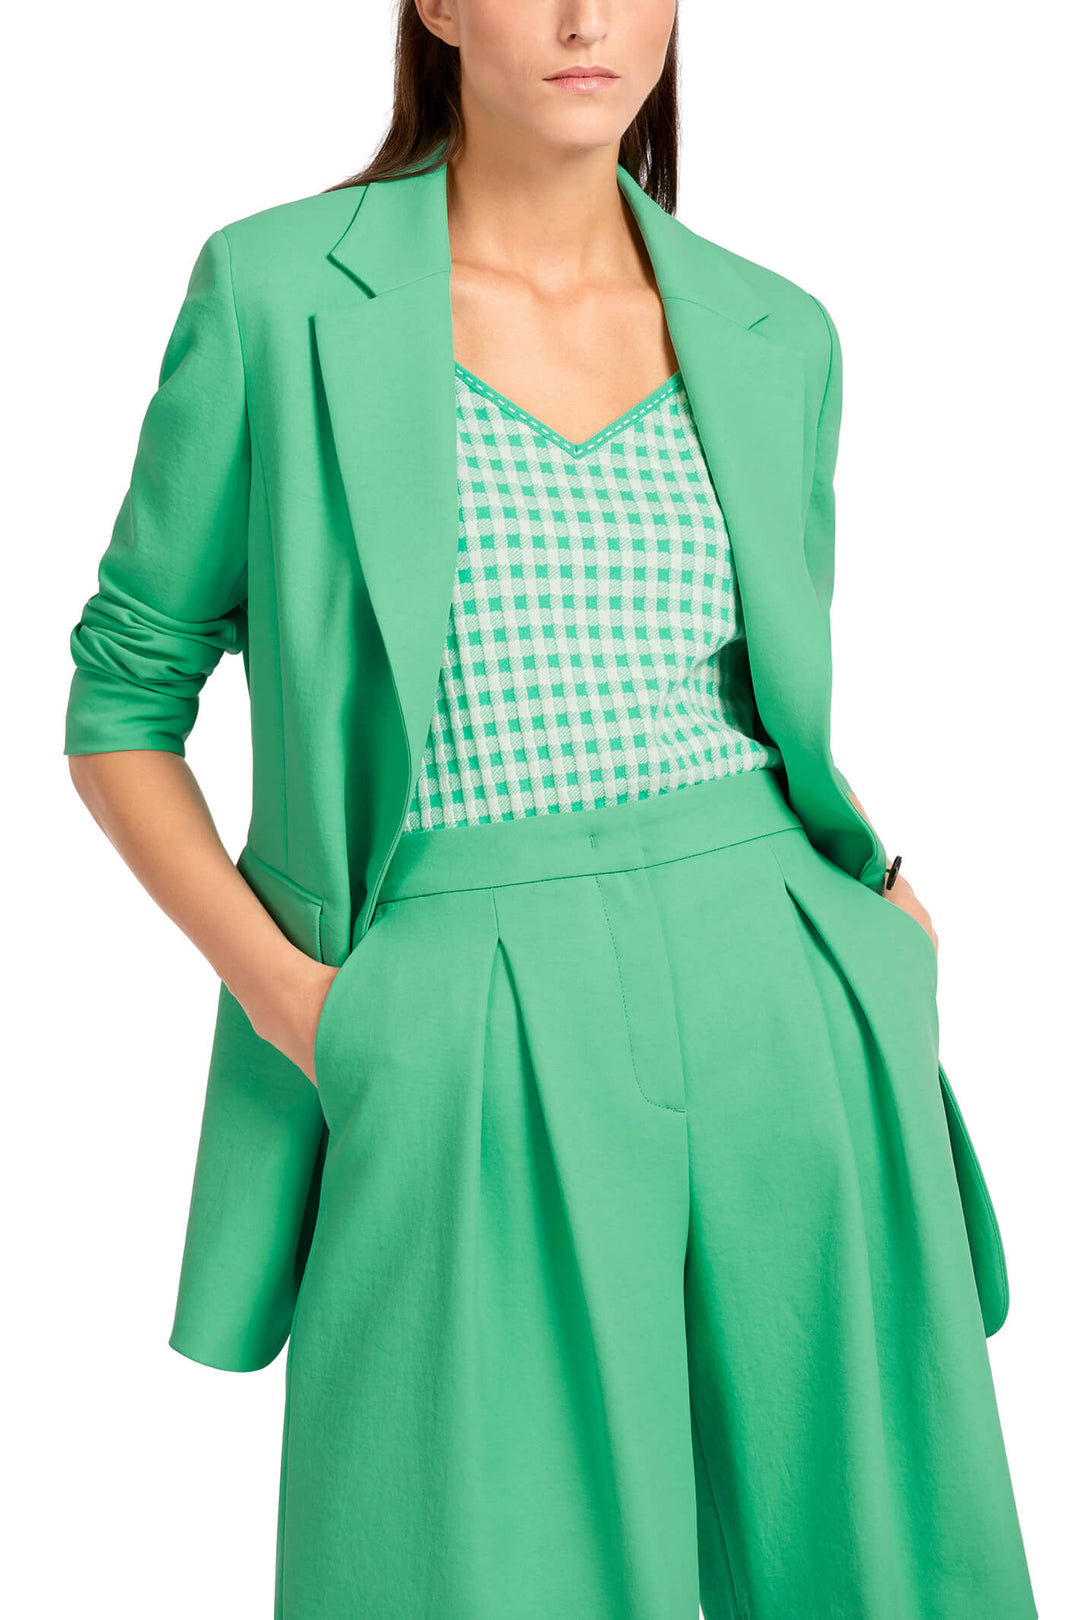 Marc Cain Collection UC 34.07 W03 Bright Jade Green Jacket - Olivia Grace Fashion